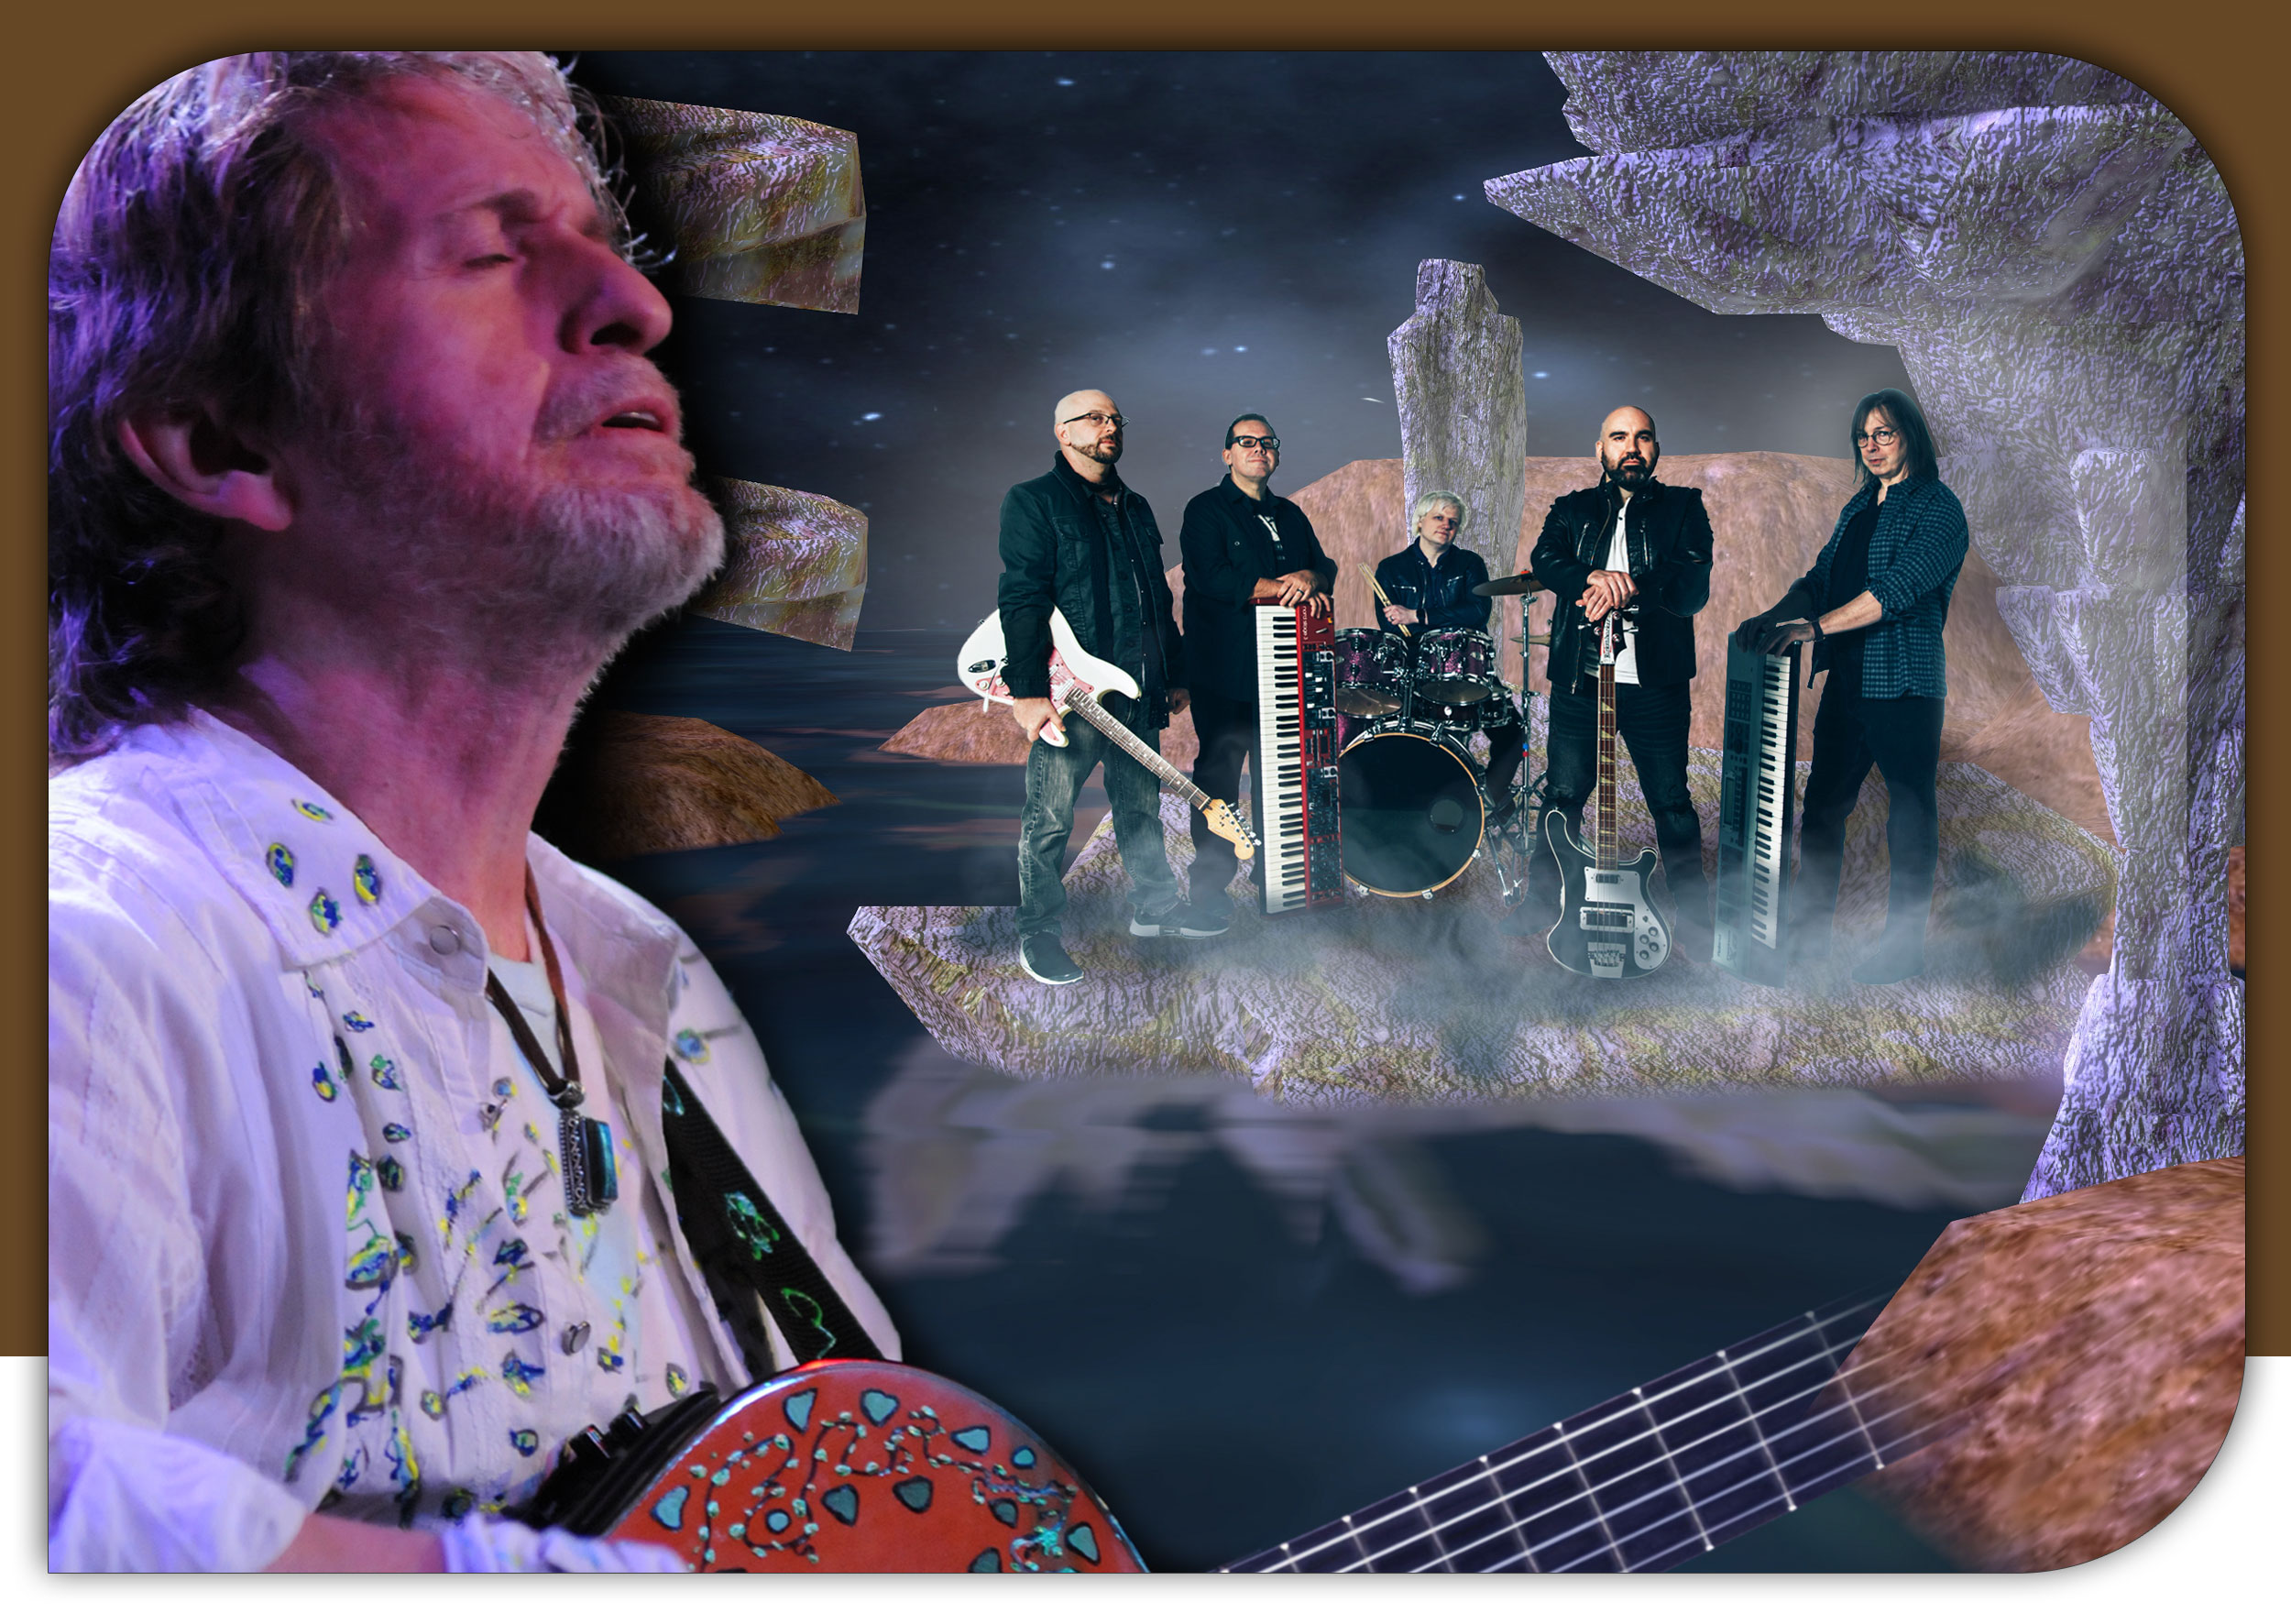 Yes Epics, Classics and More featuring Jon Anderson